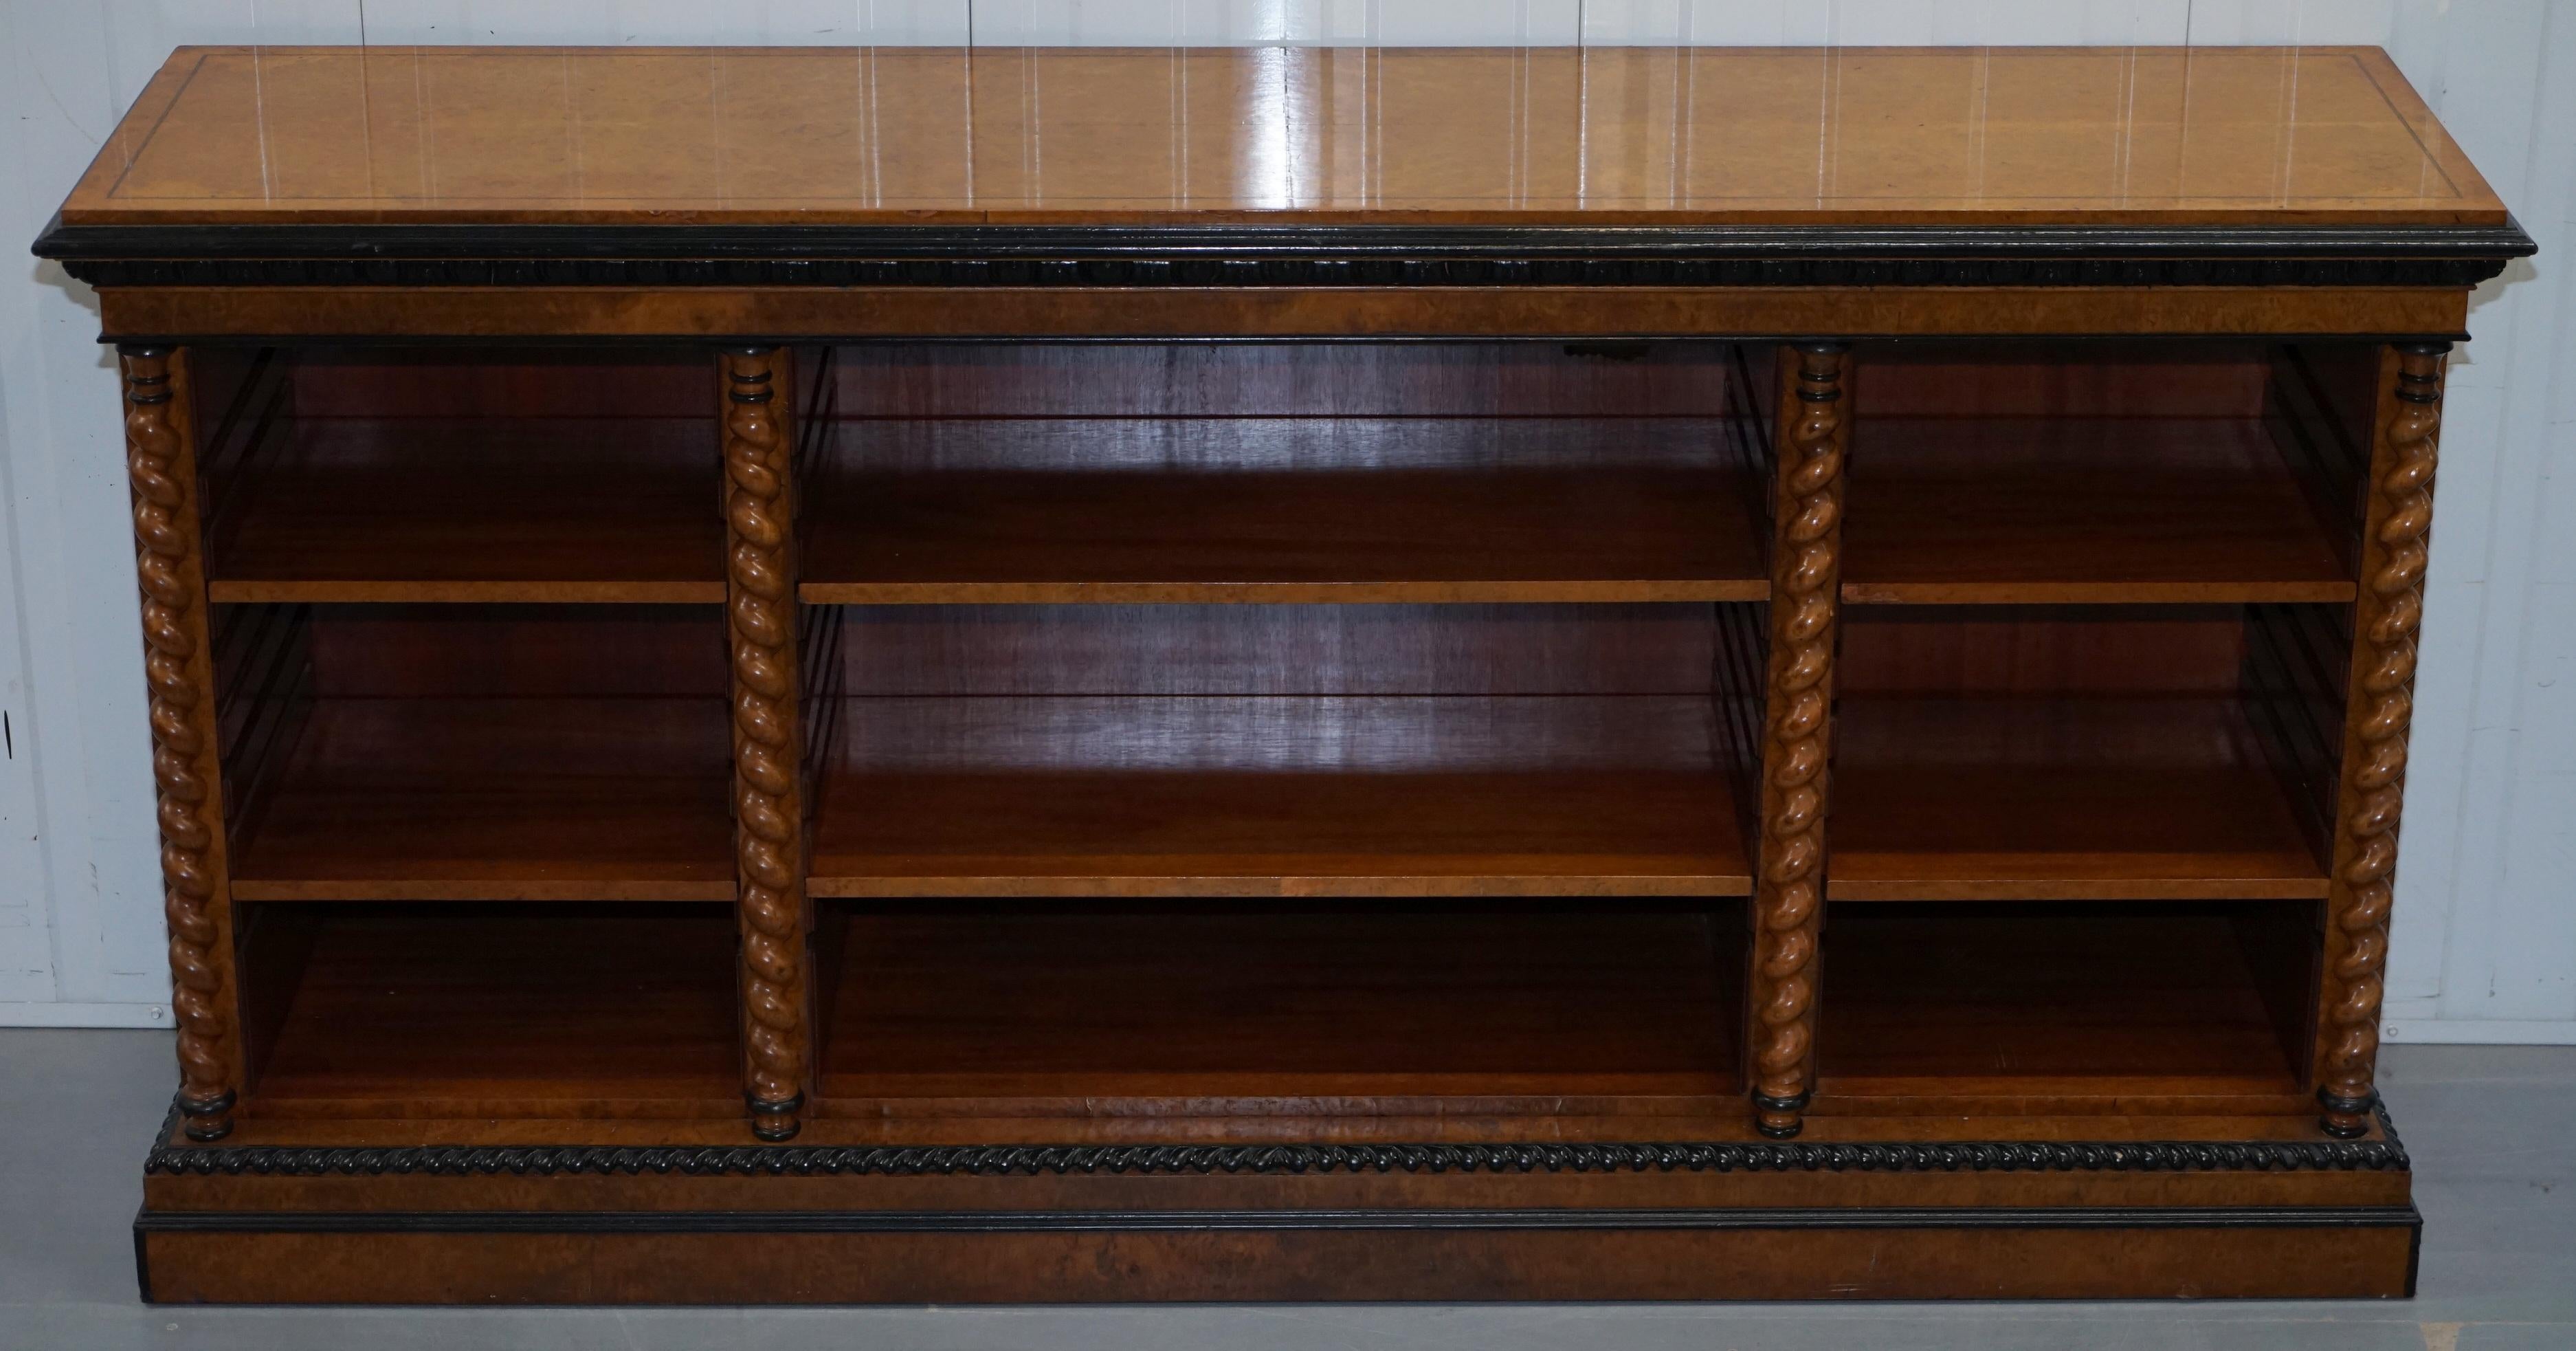 We are delighted to offer for sale this lovely burr walnut Veneer break front sideboard bookcase with ebonized barley twist columns 

A very good looking and decorative piece, rare to find with the breakfront and I’ve never seen Victorian style